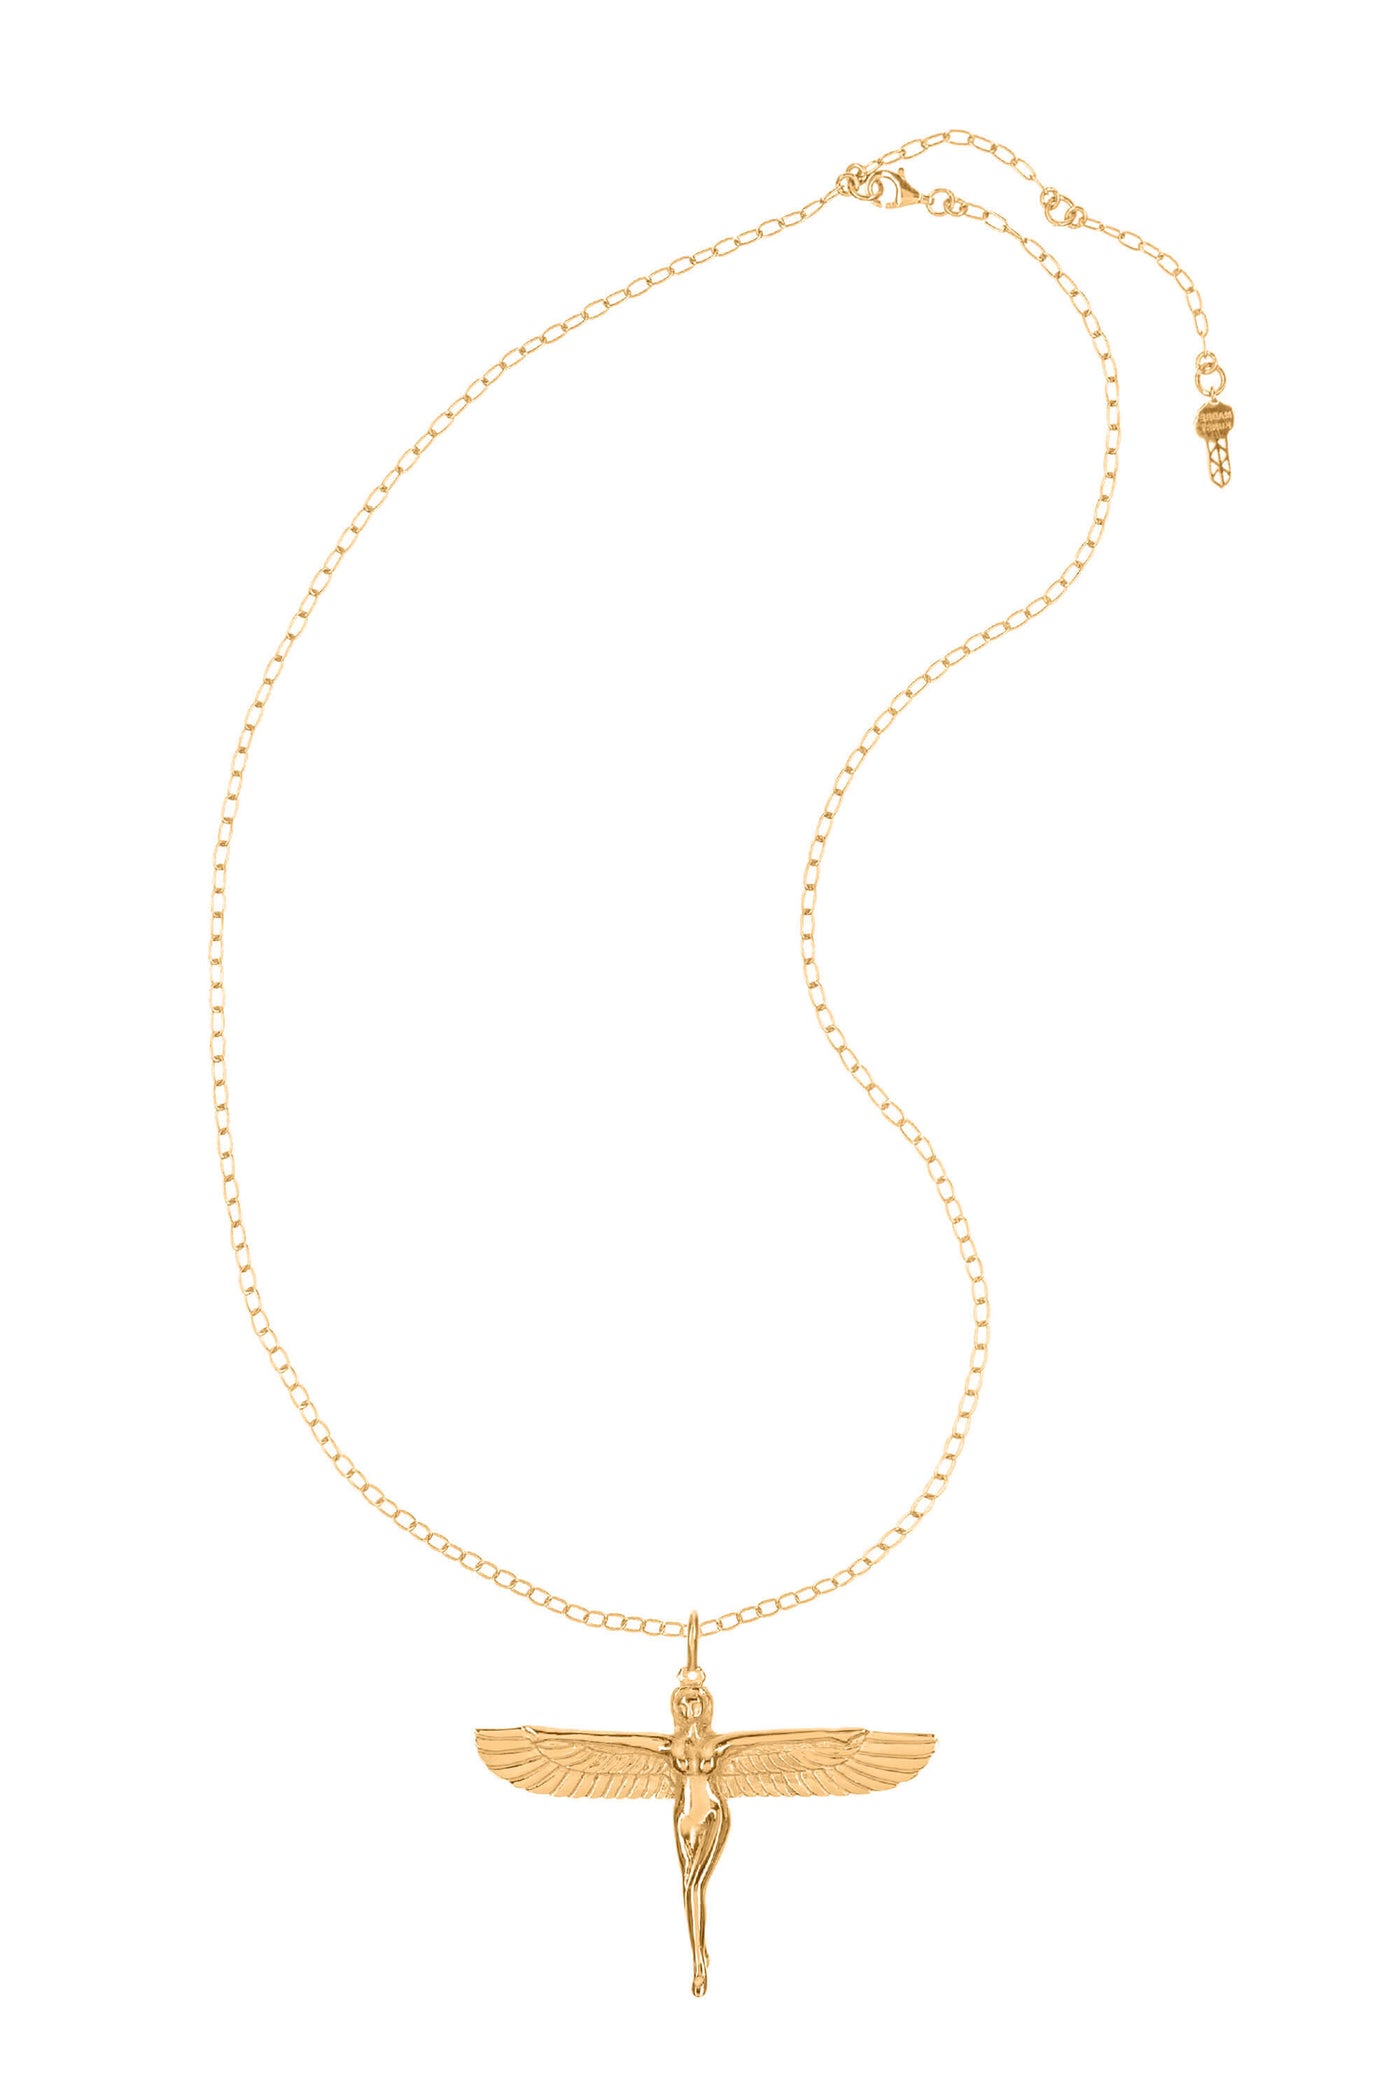 Ishtar necklace. Silver, gold-plated